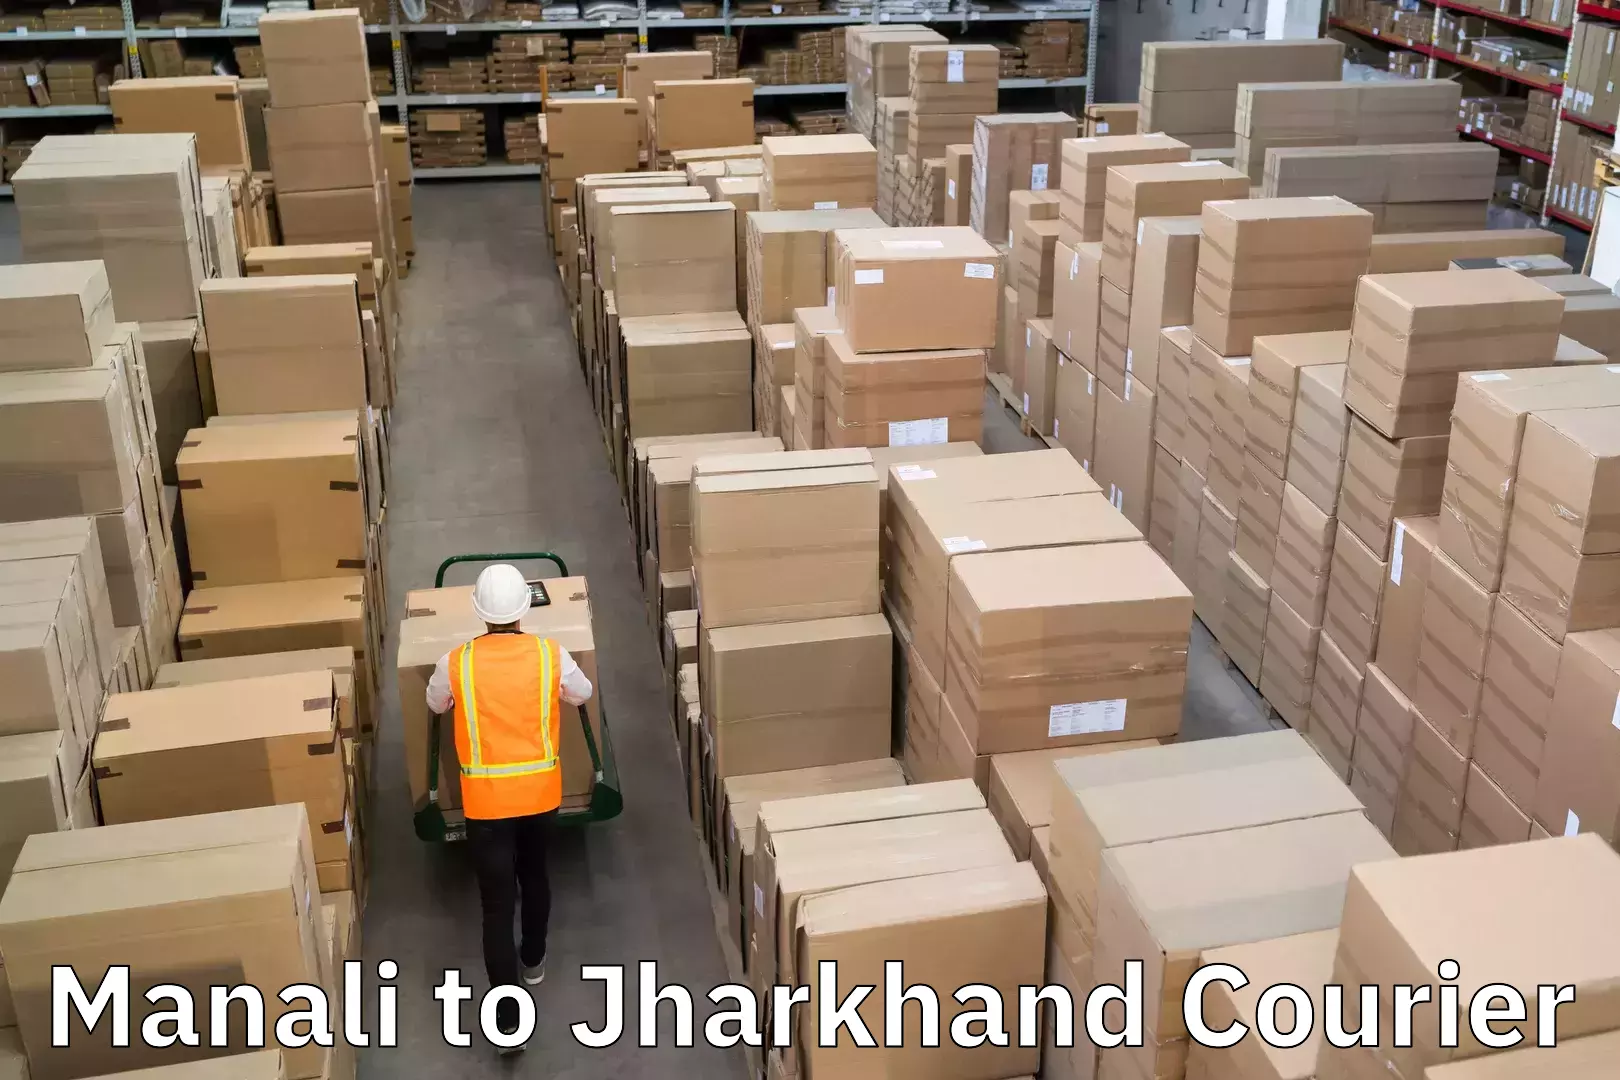 Courier service efficiency Manali to Jharkhand